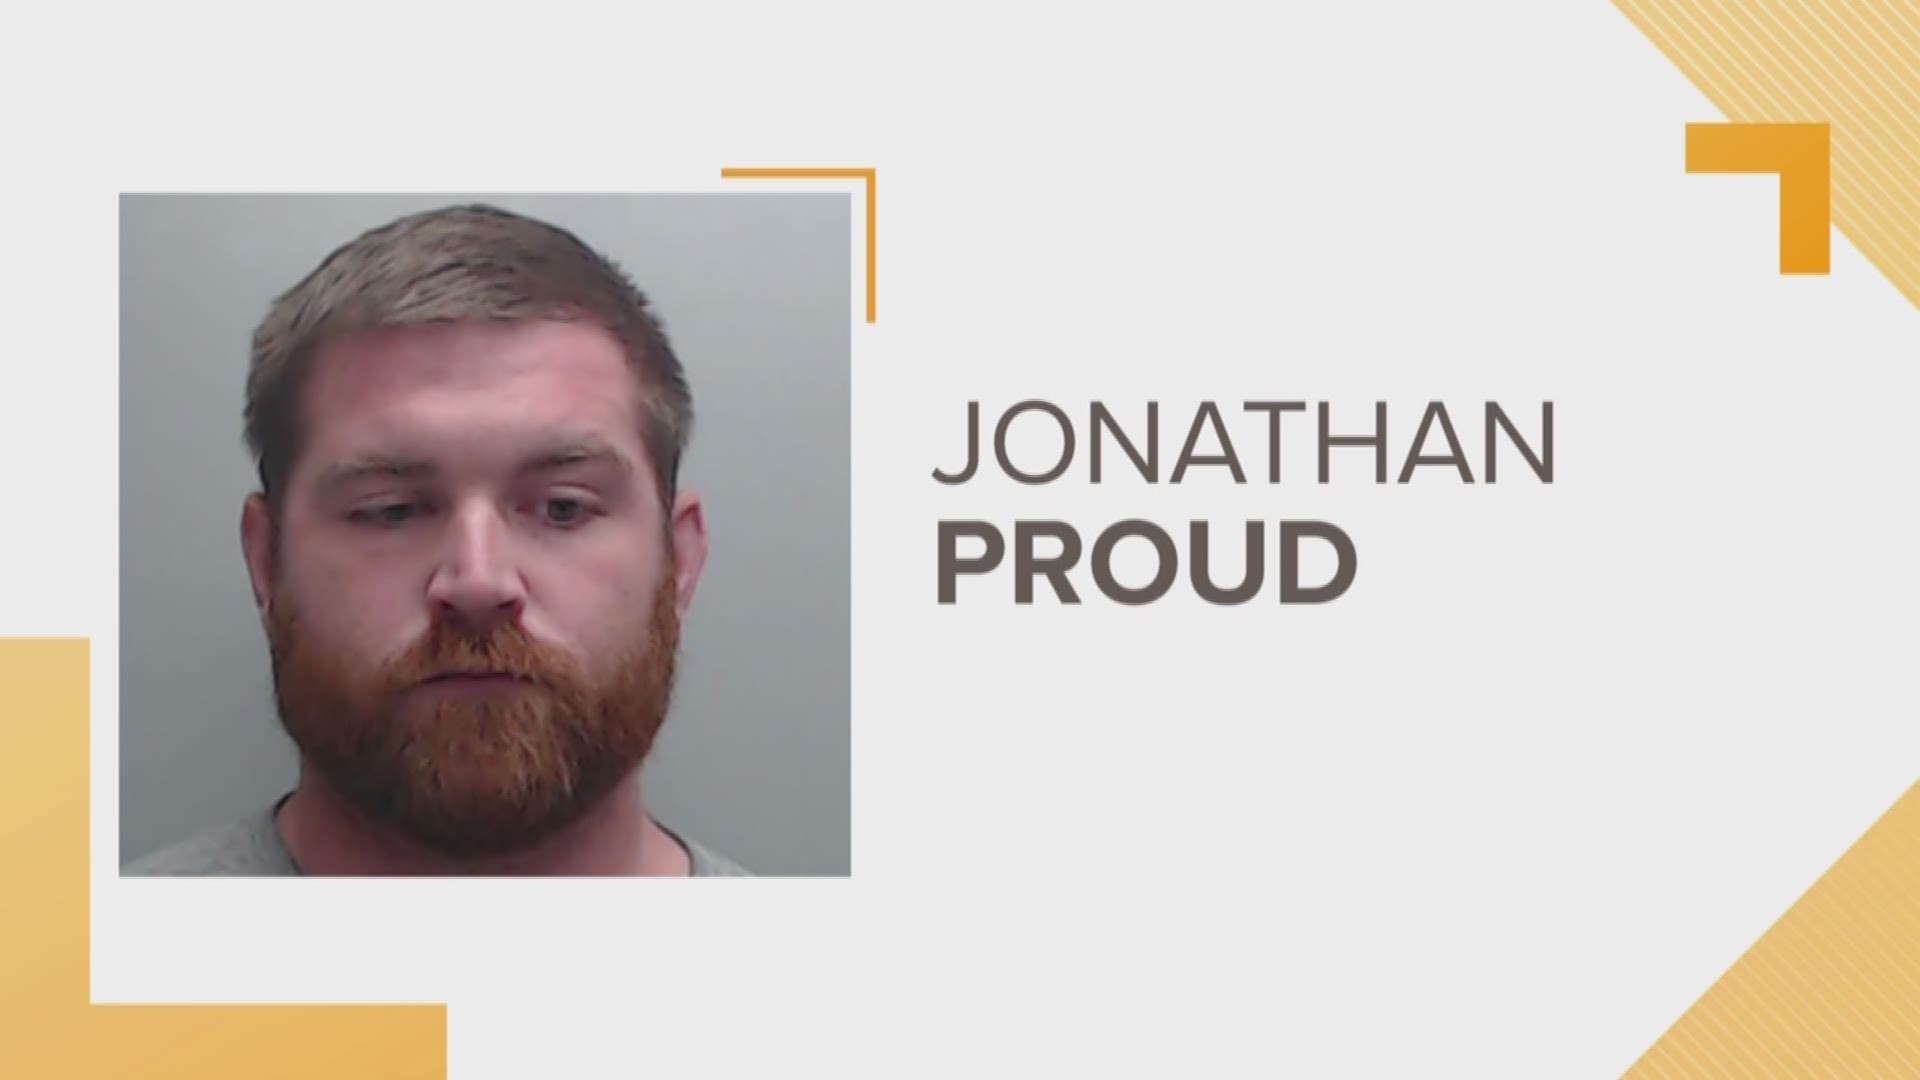 Xxxvideo14 - High school coach charged with child porn after wife finds photos on his  phone, affidavit says | kvue.com